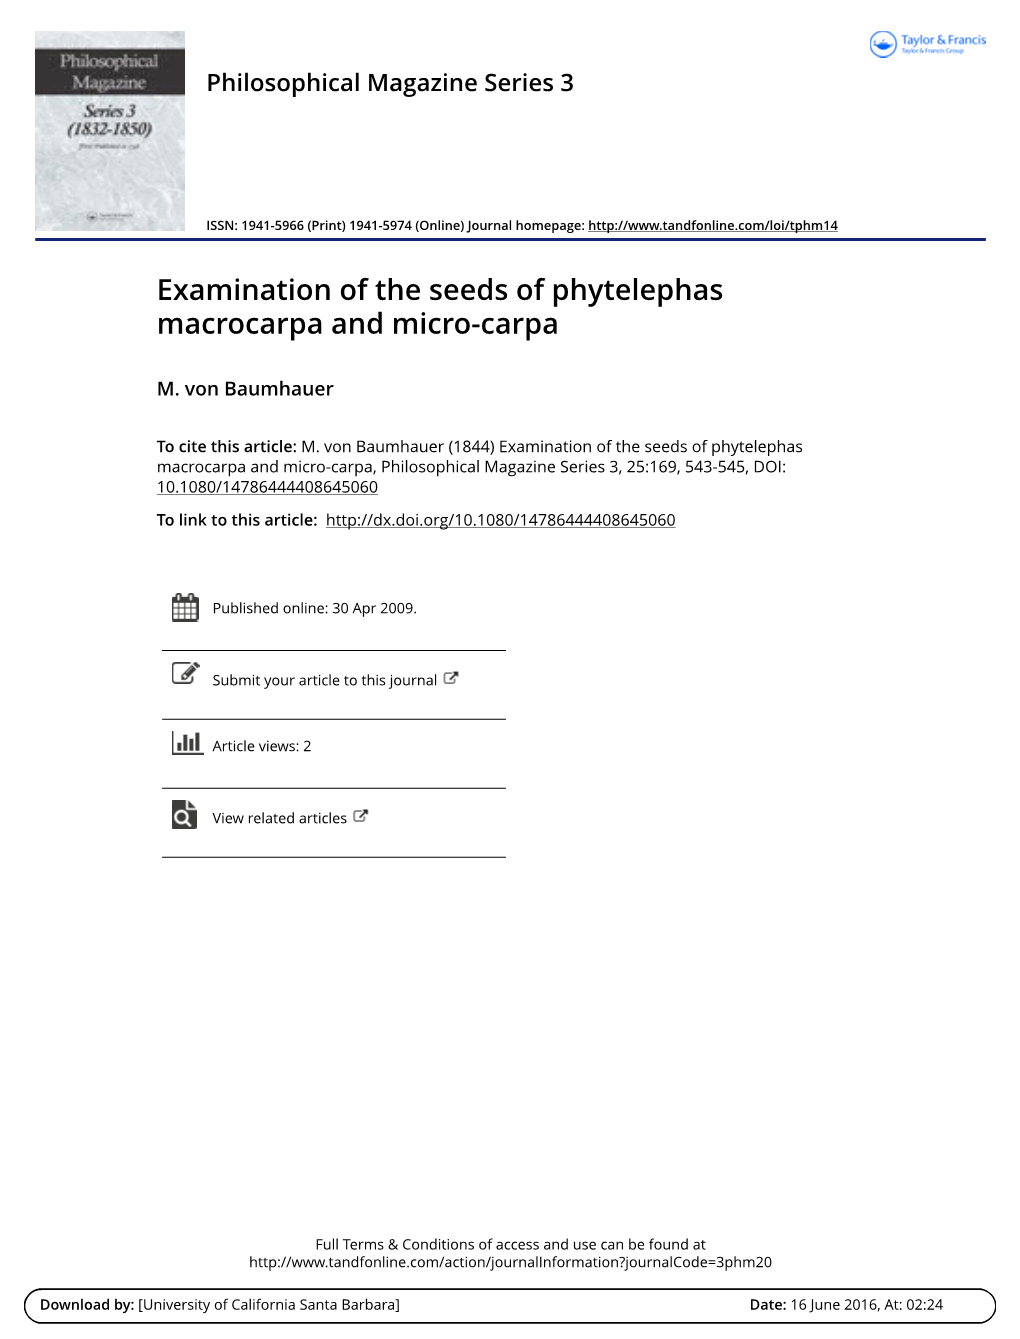 Examination of the Seeds of Phytelephas Macrocarpa and Micro-Carpa